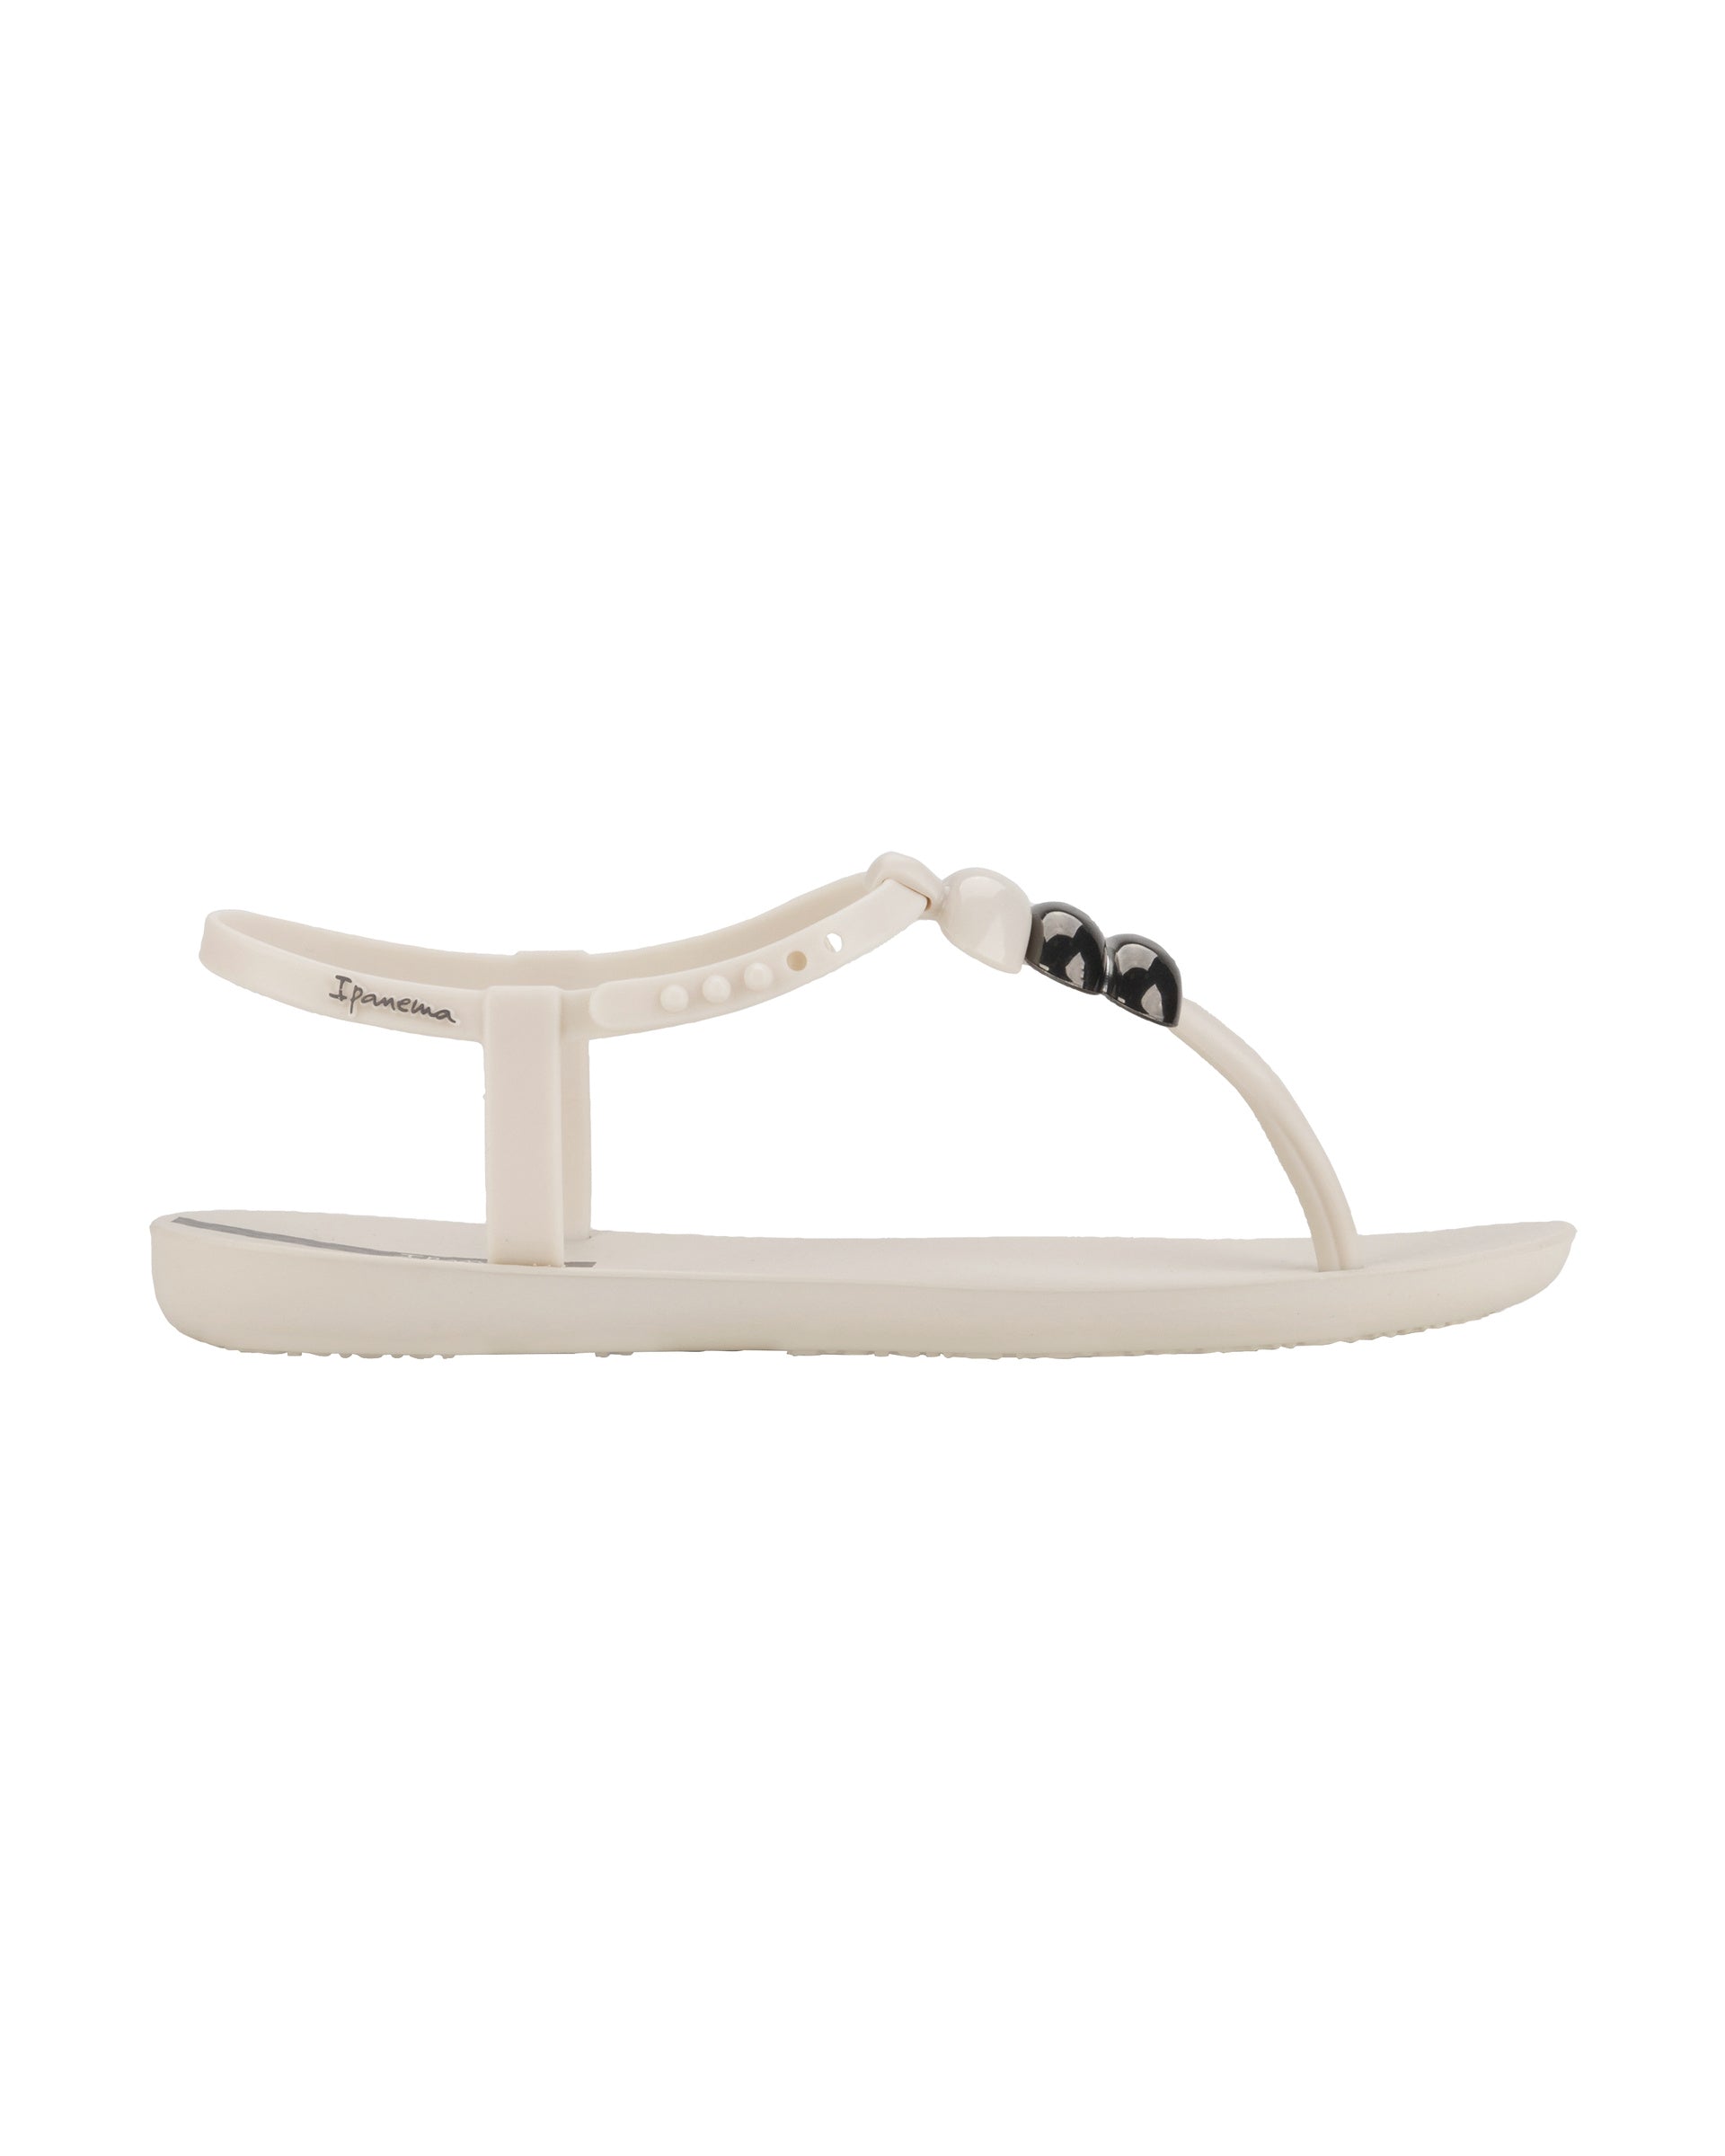 Outer side view of a beige Ipanema Class women's sandal with 3 bubble baubles on the t-strap.